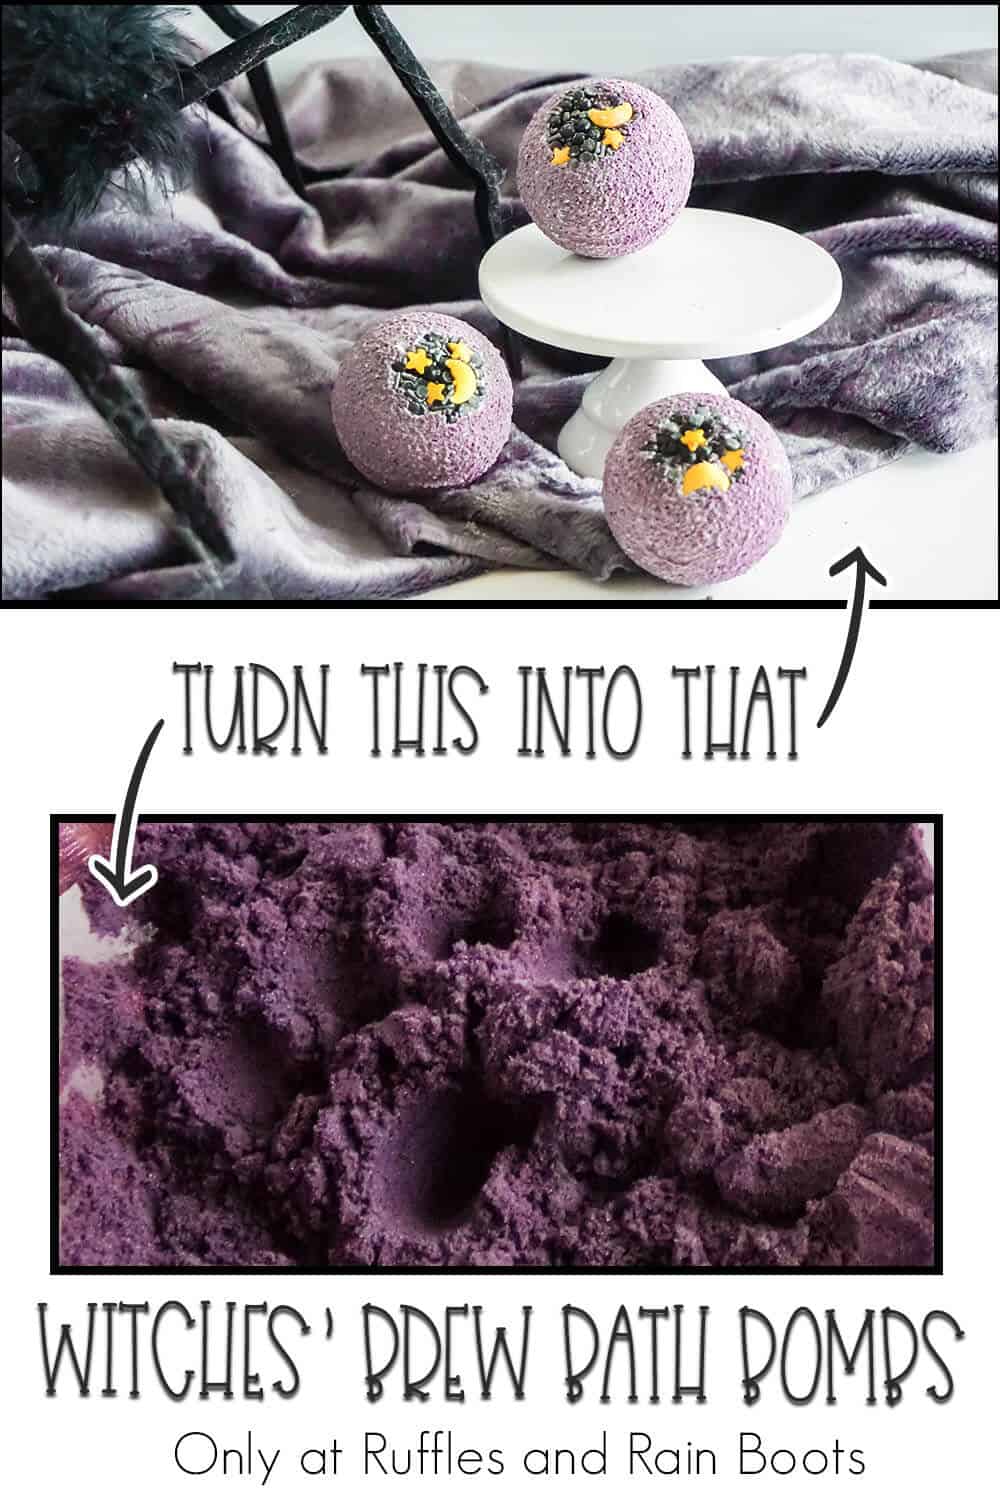 photo collage of how to make halloween bath bombs with text which reads turn this into that witches brew bath bombs